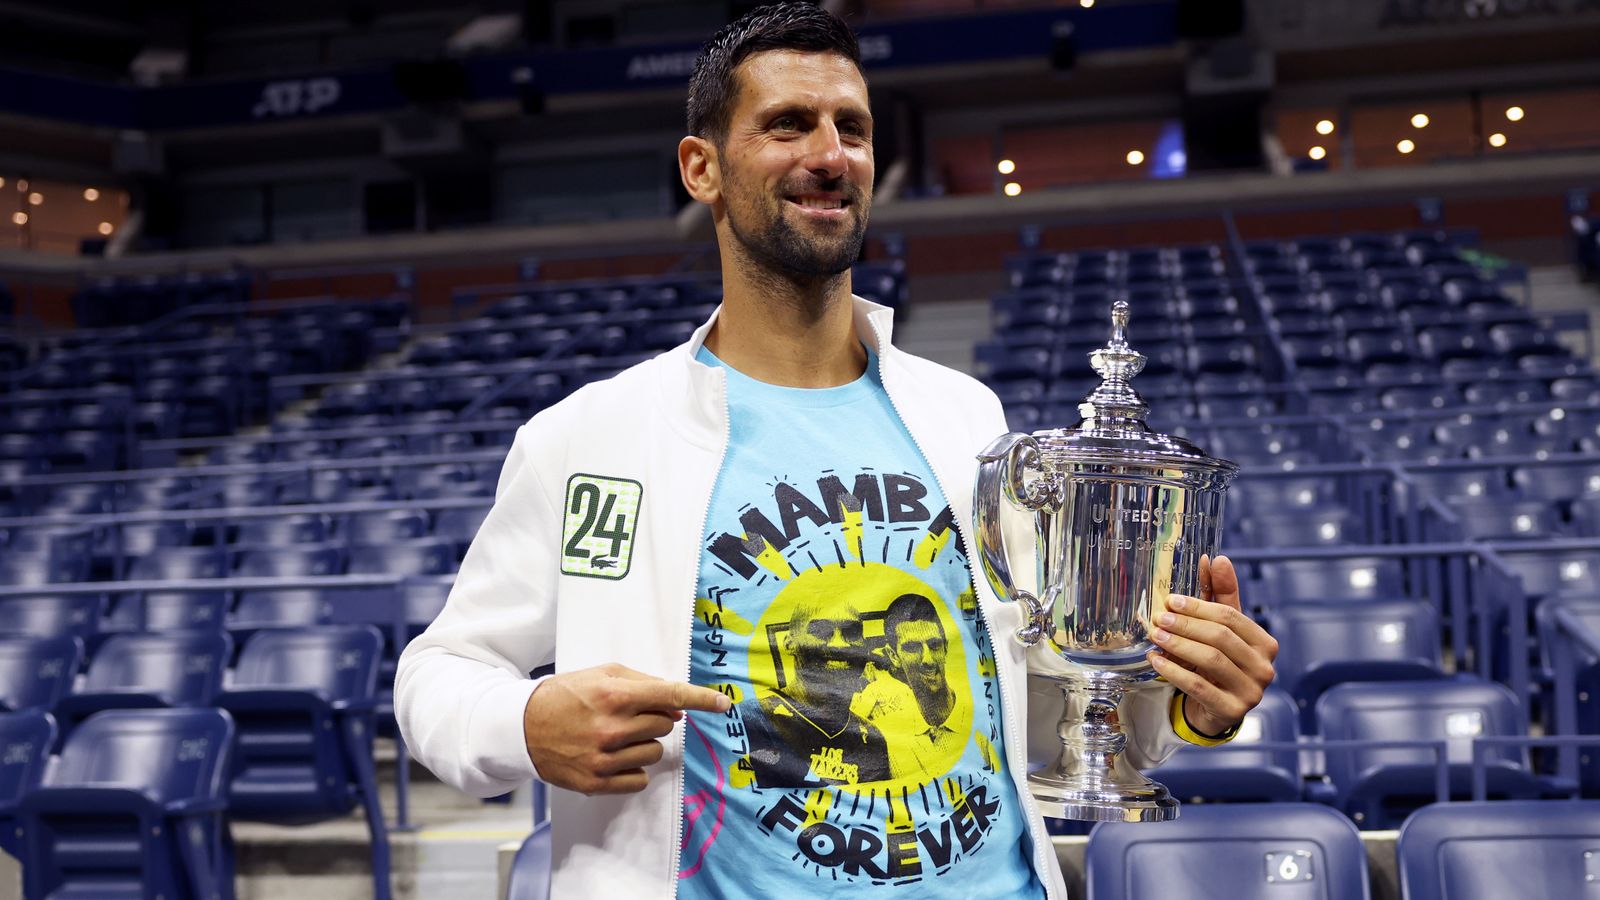 US Open: Novak Djokovic pays tribute to Kobe Bryant subsequent 24th Grand Slam victory as he vows to continue participating in | Tennis Information